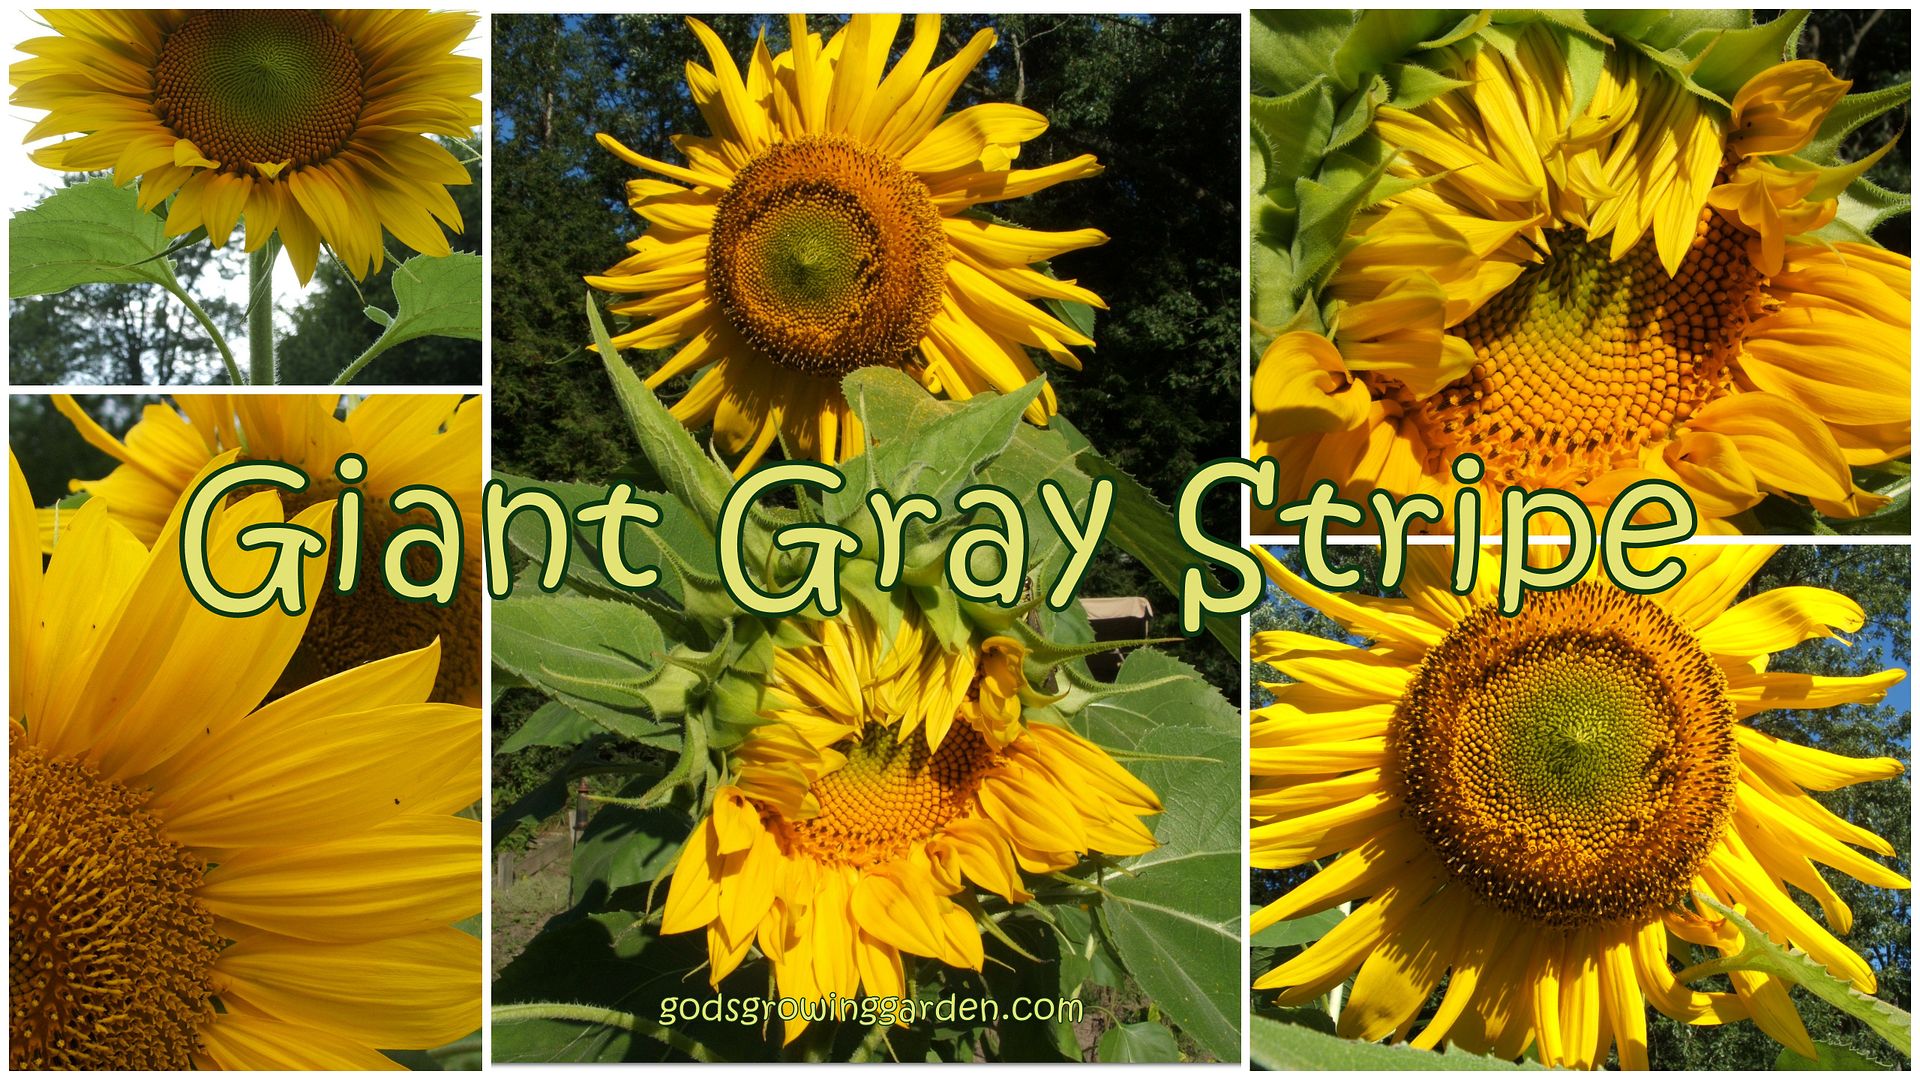 sunflowers by Angie Ouellette-Tower for godsgrowinggarden.com photo 2013-09-01_zpse1f84b06.jpg